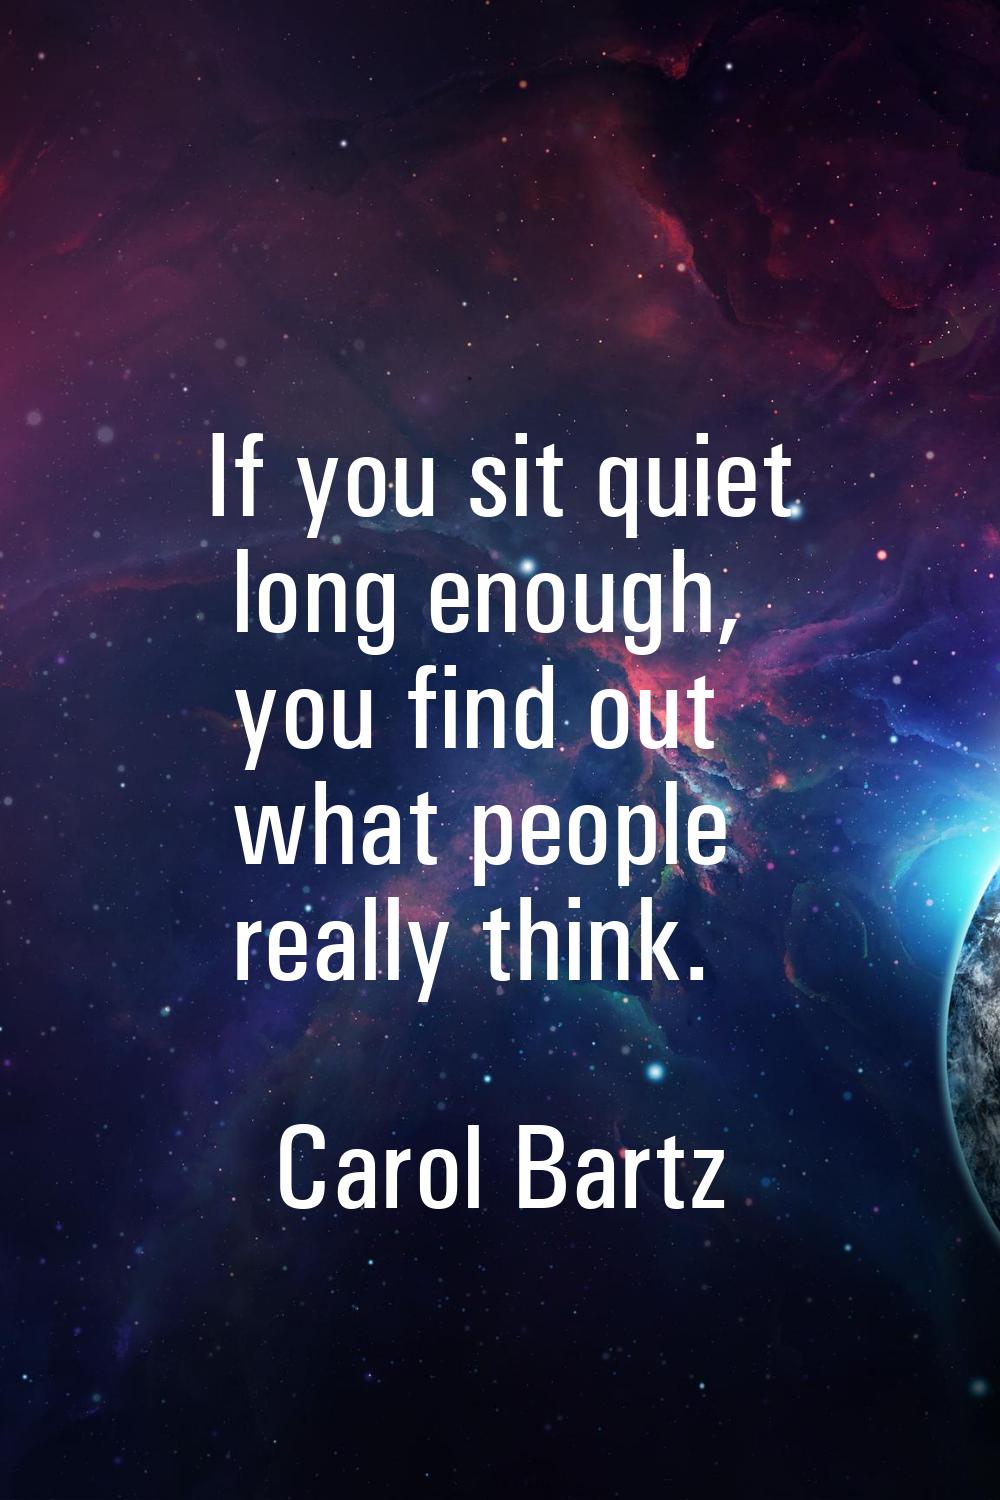 If you sit quiet long enough, you find out what people really think.